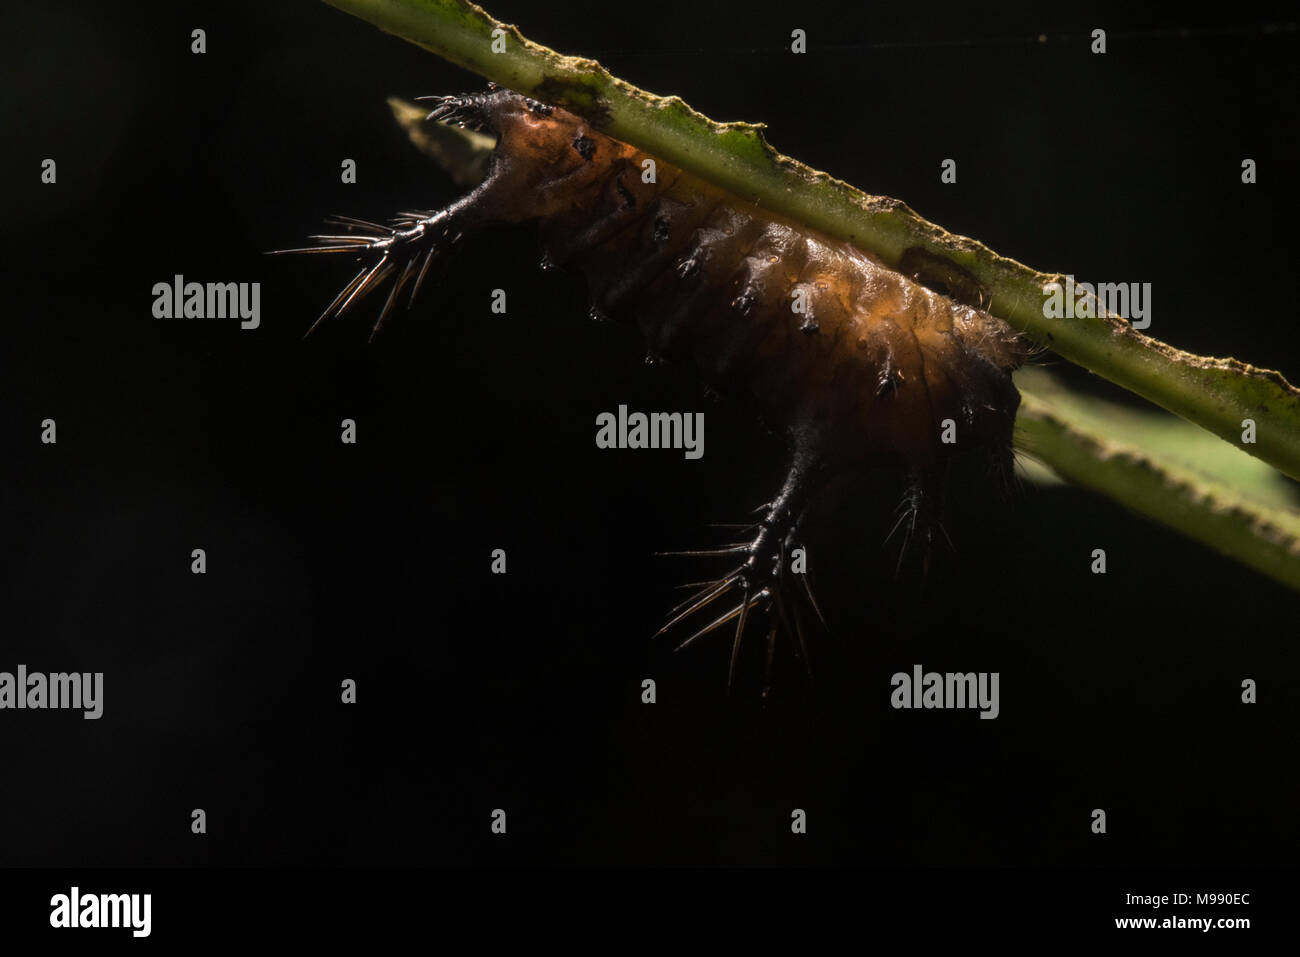 A upside down slug caterpillar on the underside of a leaf in the Peruvian rainforest, it packs a powerful and painful sting to protect itself. Stock Photo